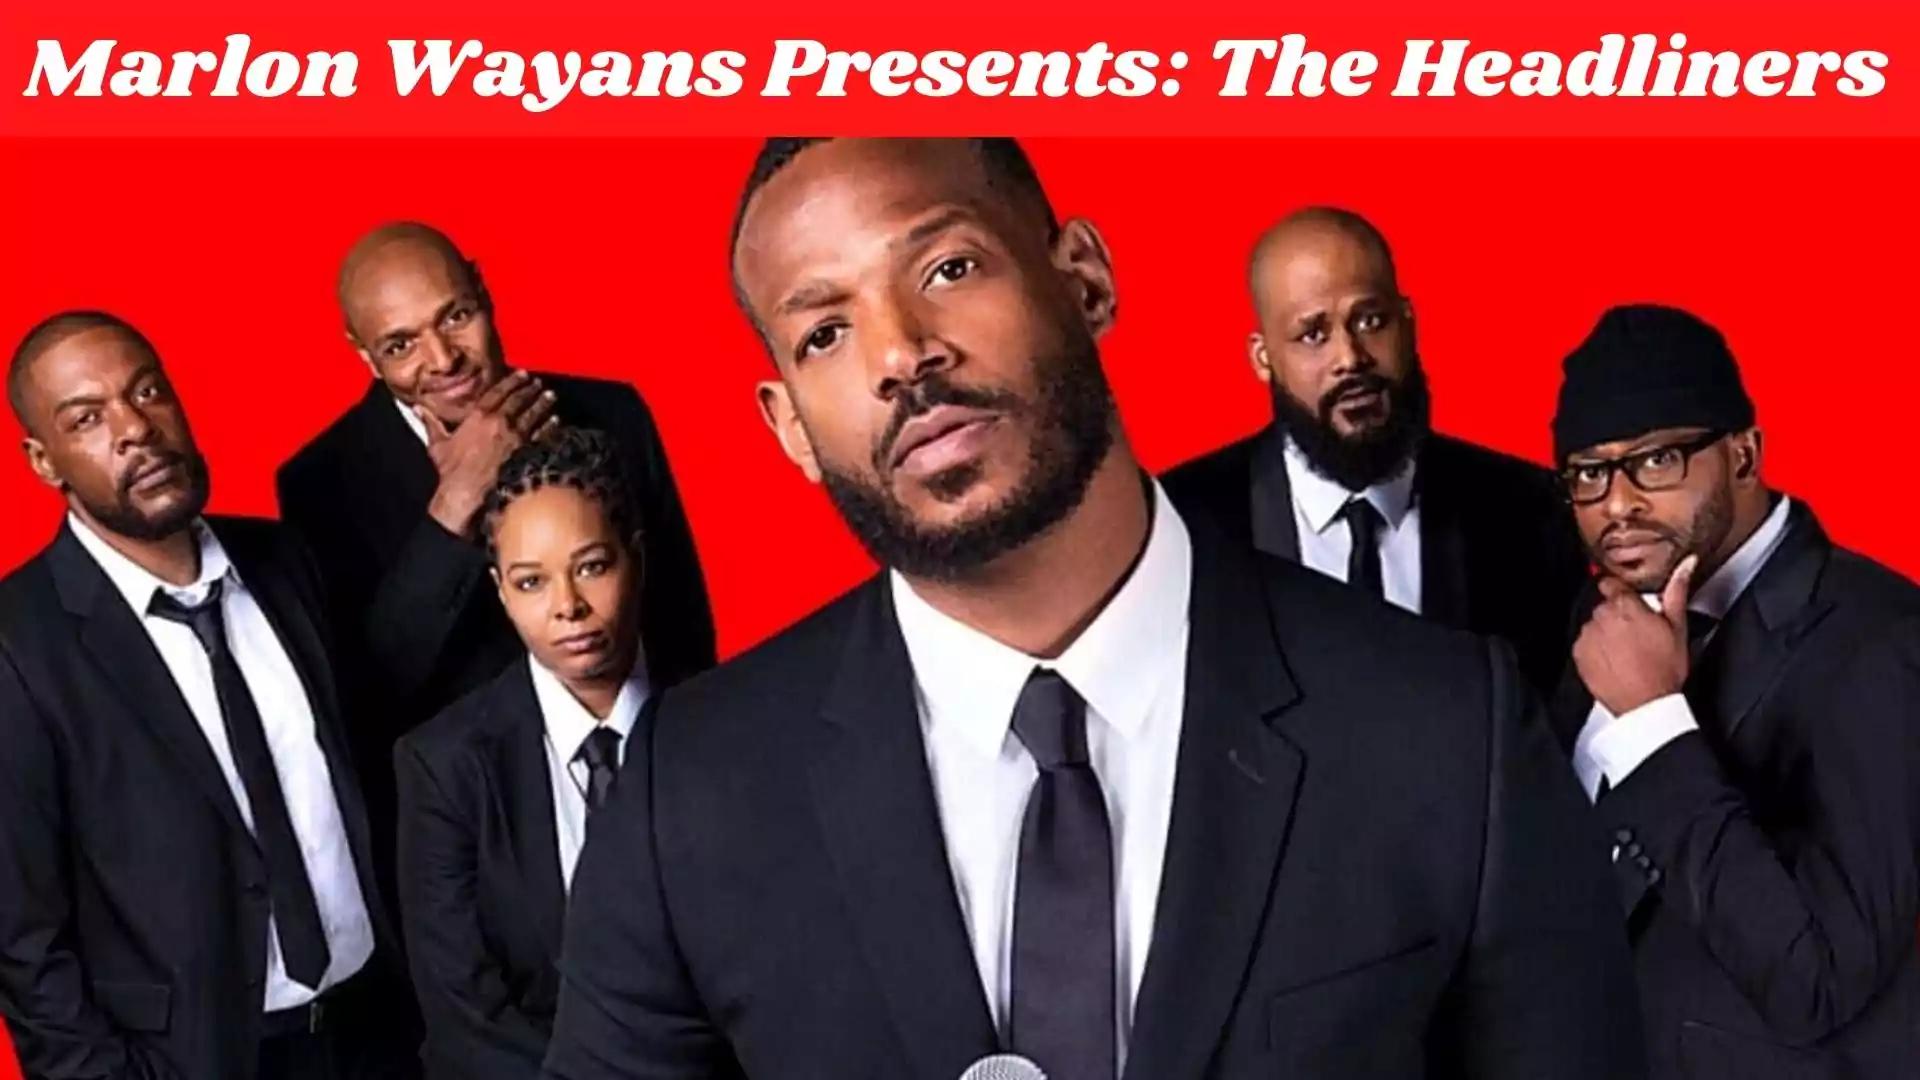 The One Hour StandUp Special ‘Marlon Wayans Presents The Headliners